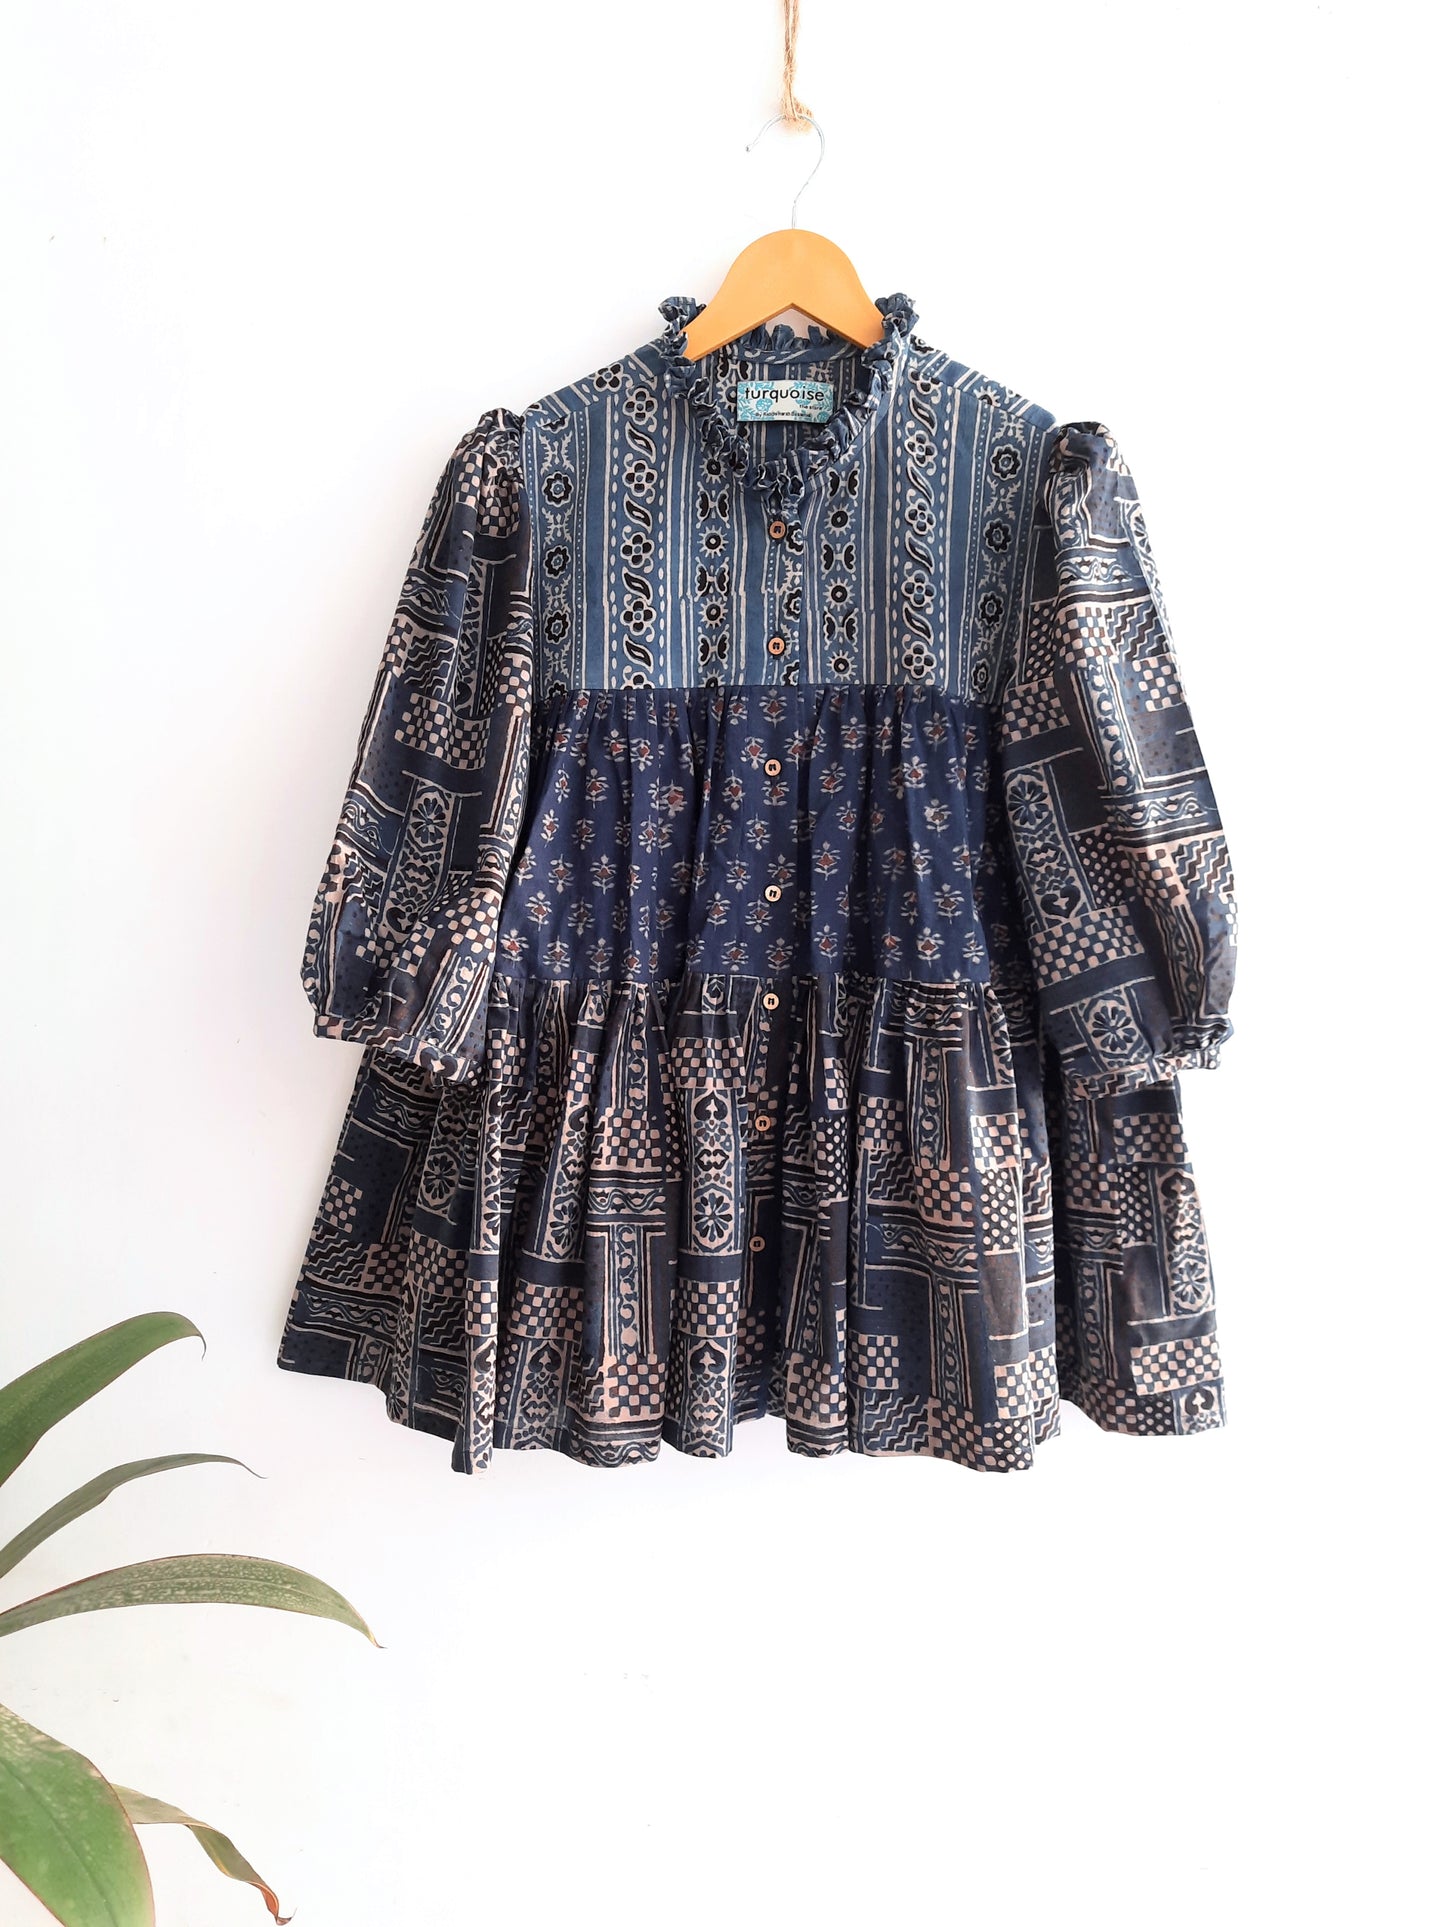 Indigo dyed multi tiered puffed sleeves shirt, Handmade indigo shirt, Comfortable indigo dyed ajrakh shirt for her